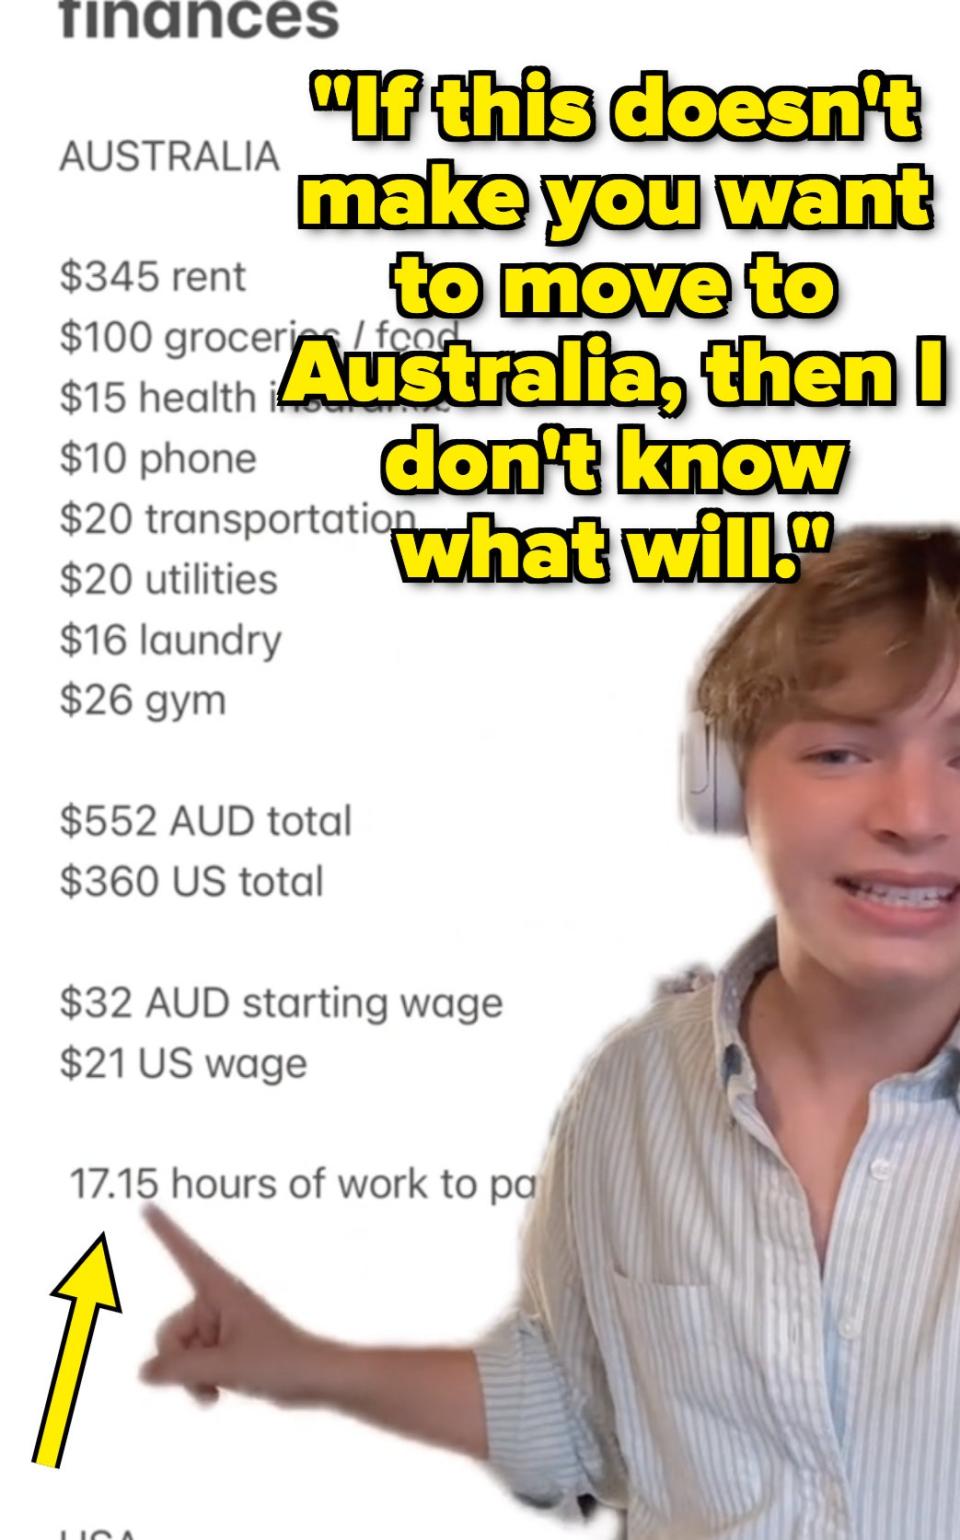 Person presenting a comparison chart of living costs between Australia and USA